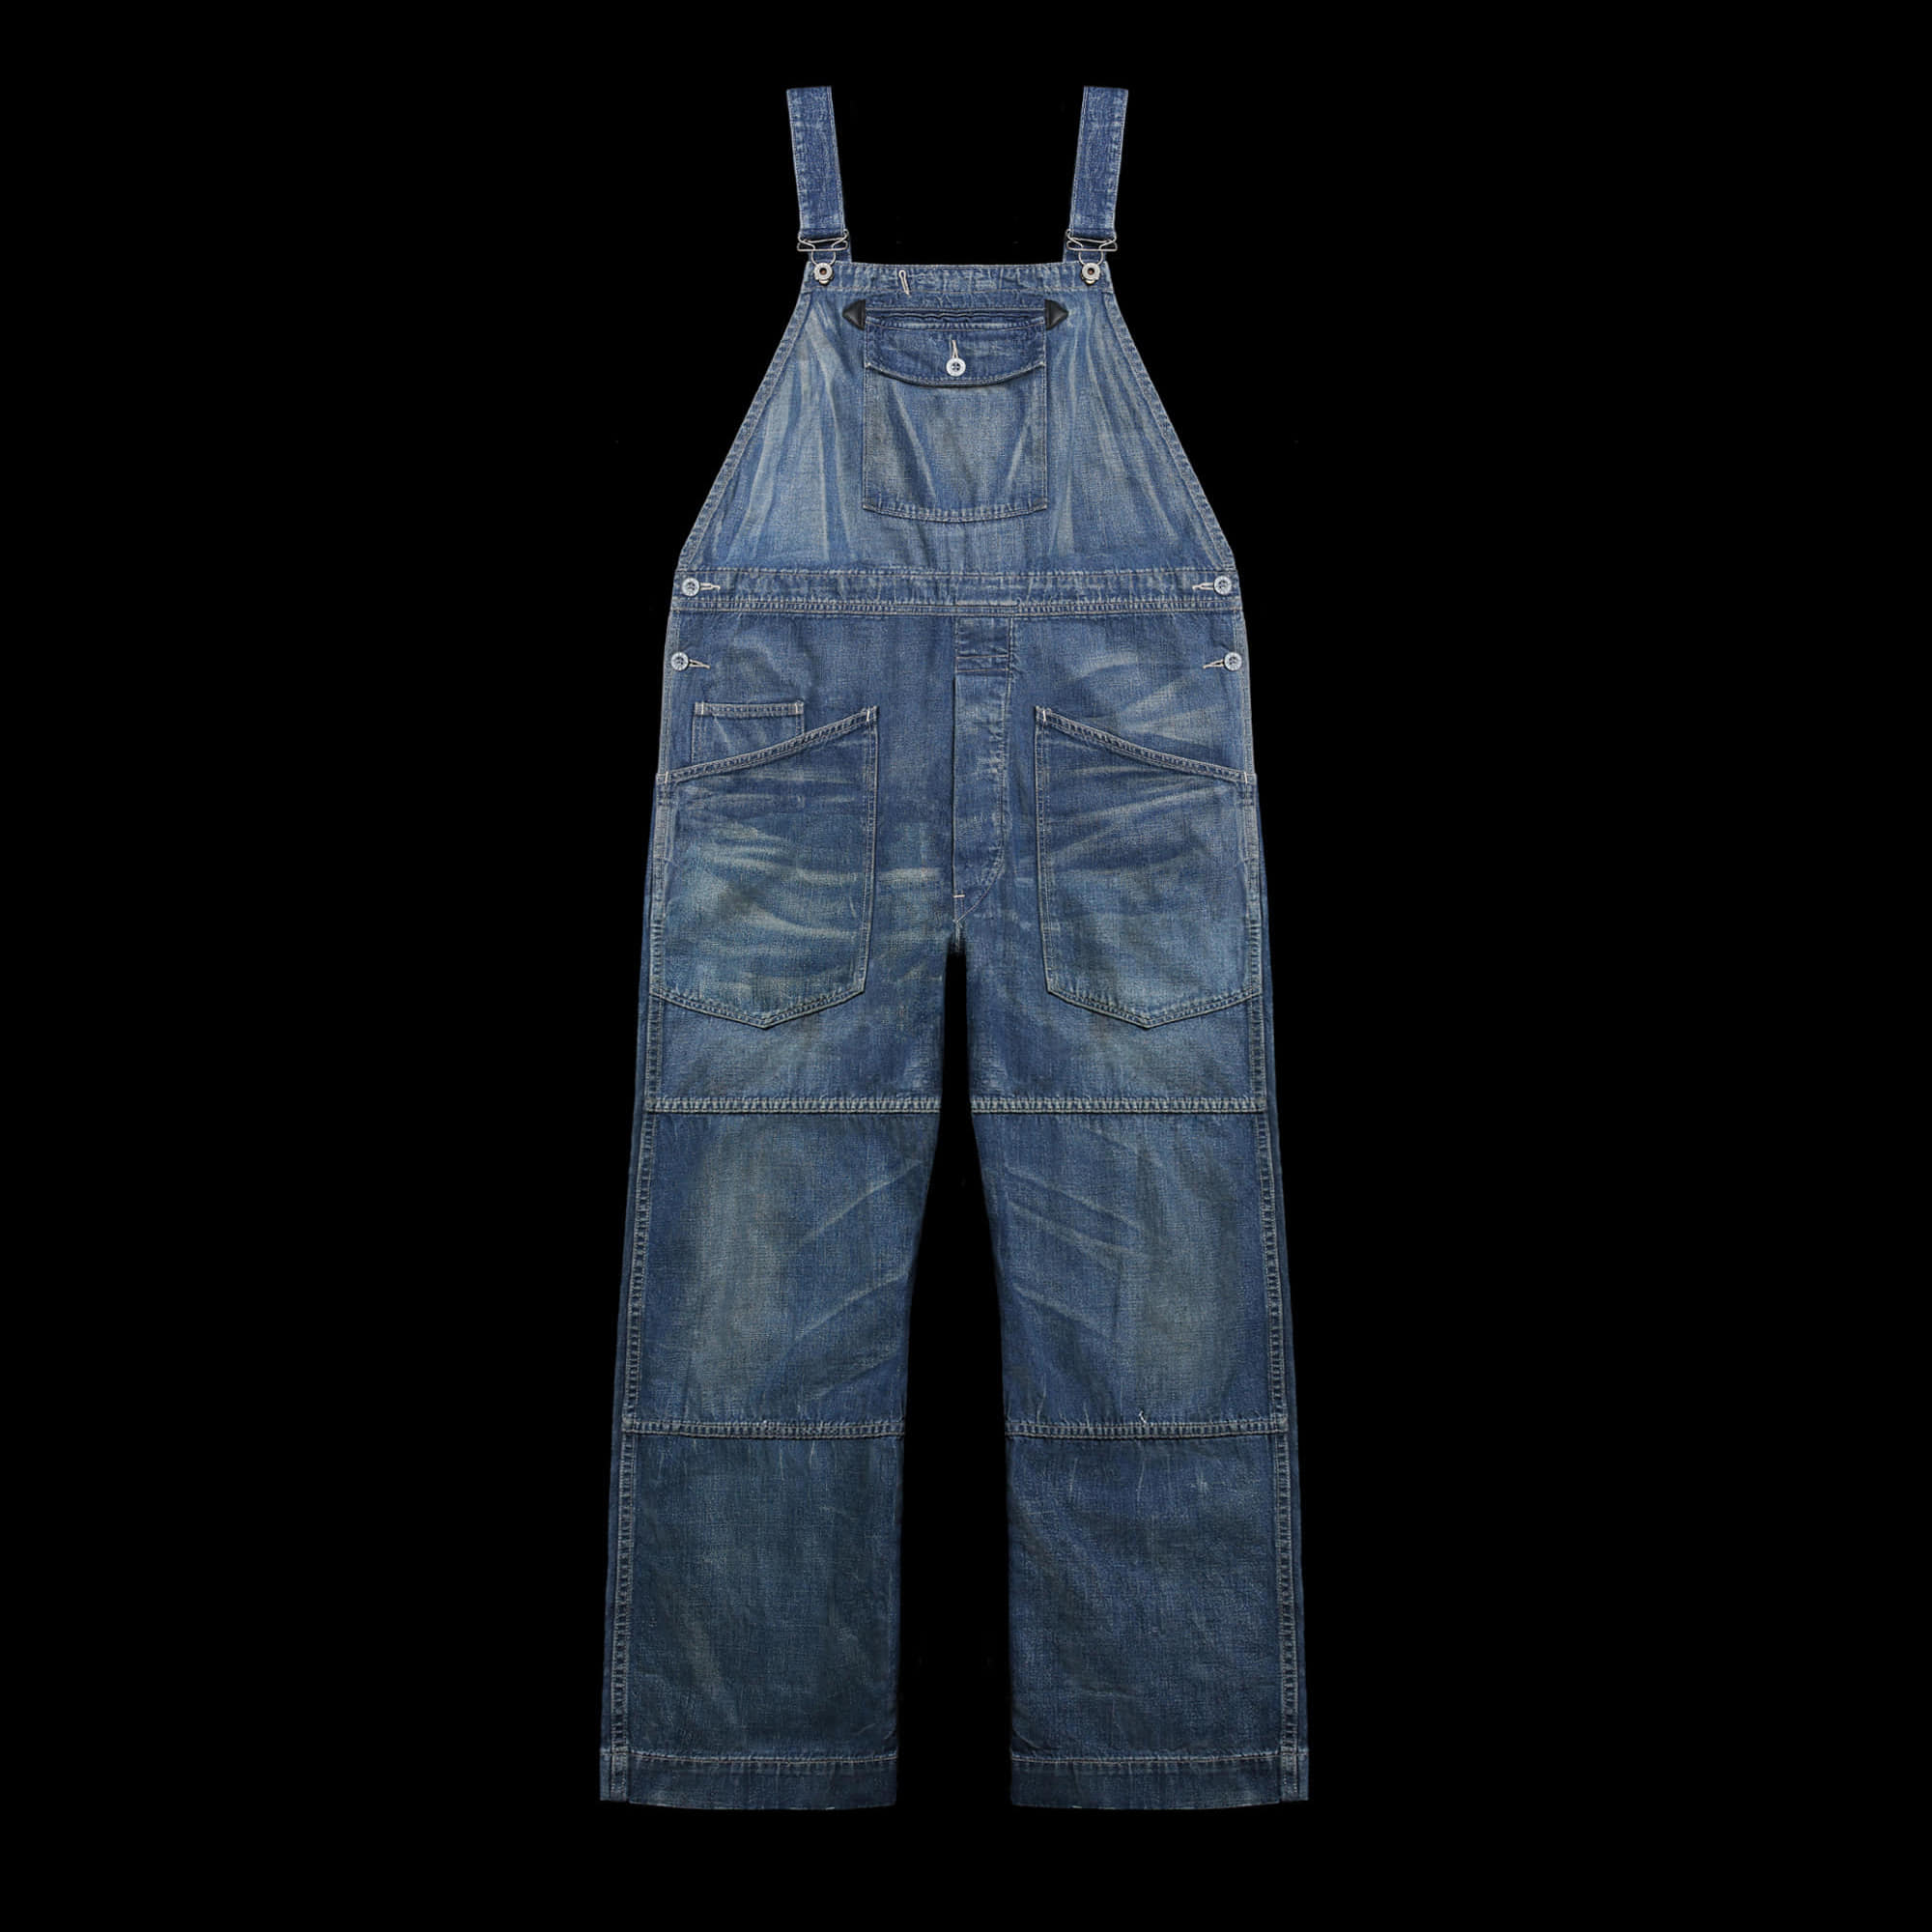 RRLLIMITED EDITIONLOWBACK OVERALL